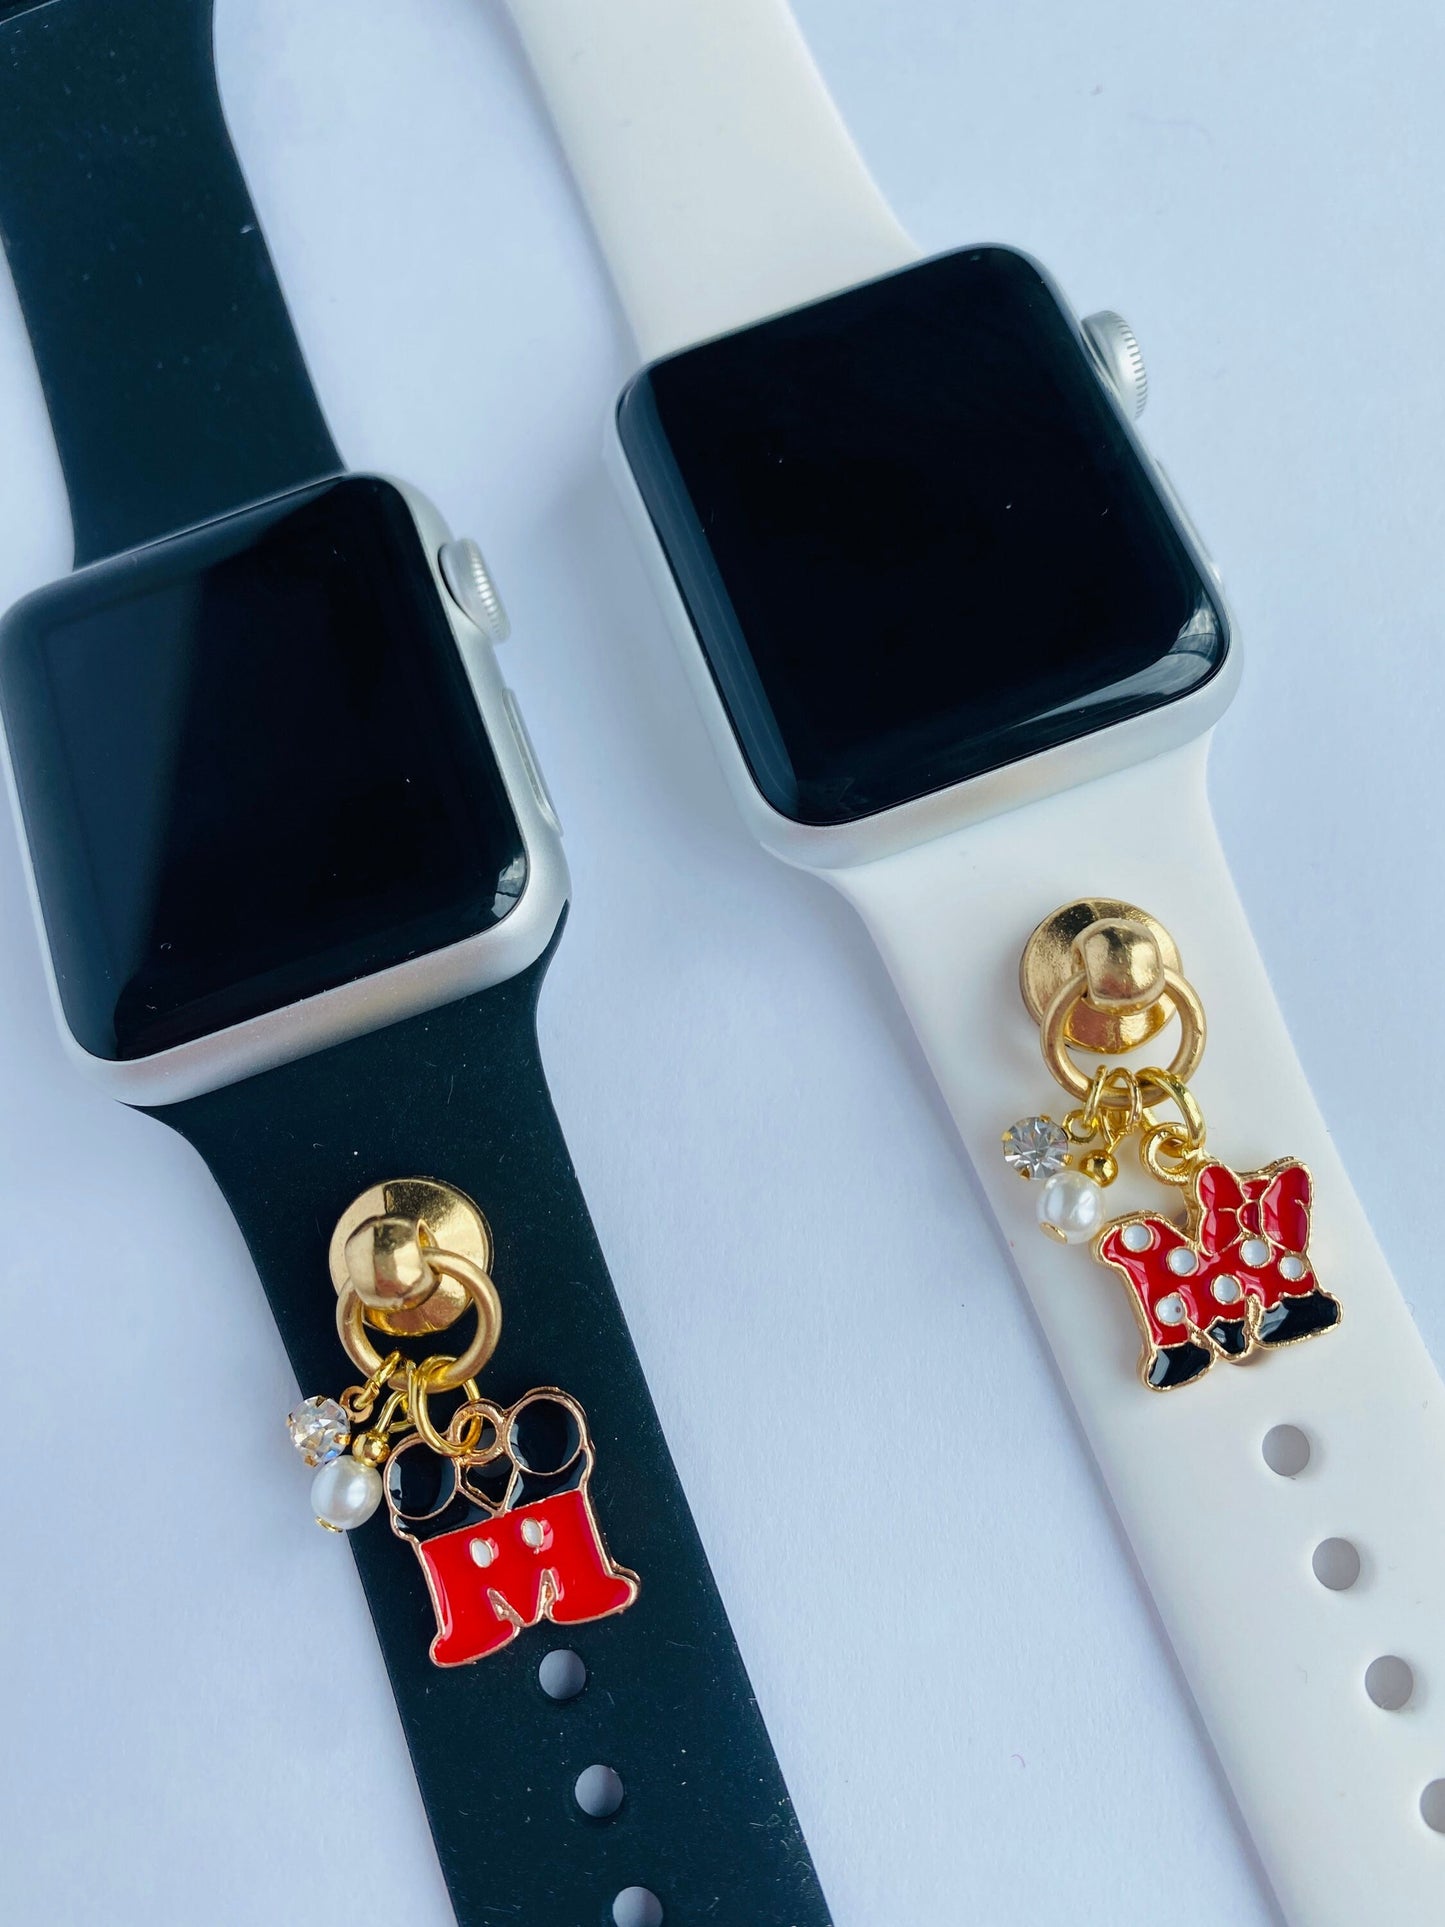 Disney Watchband Charms, Apple Watch Charms, Mickey Watchband, Minnie Mouse, Phone Case Charm, SmartWatch Charm, Apple Charm